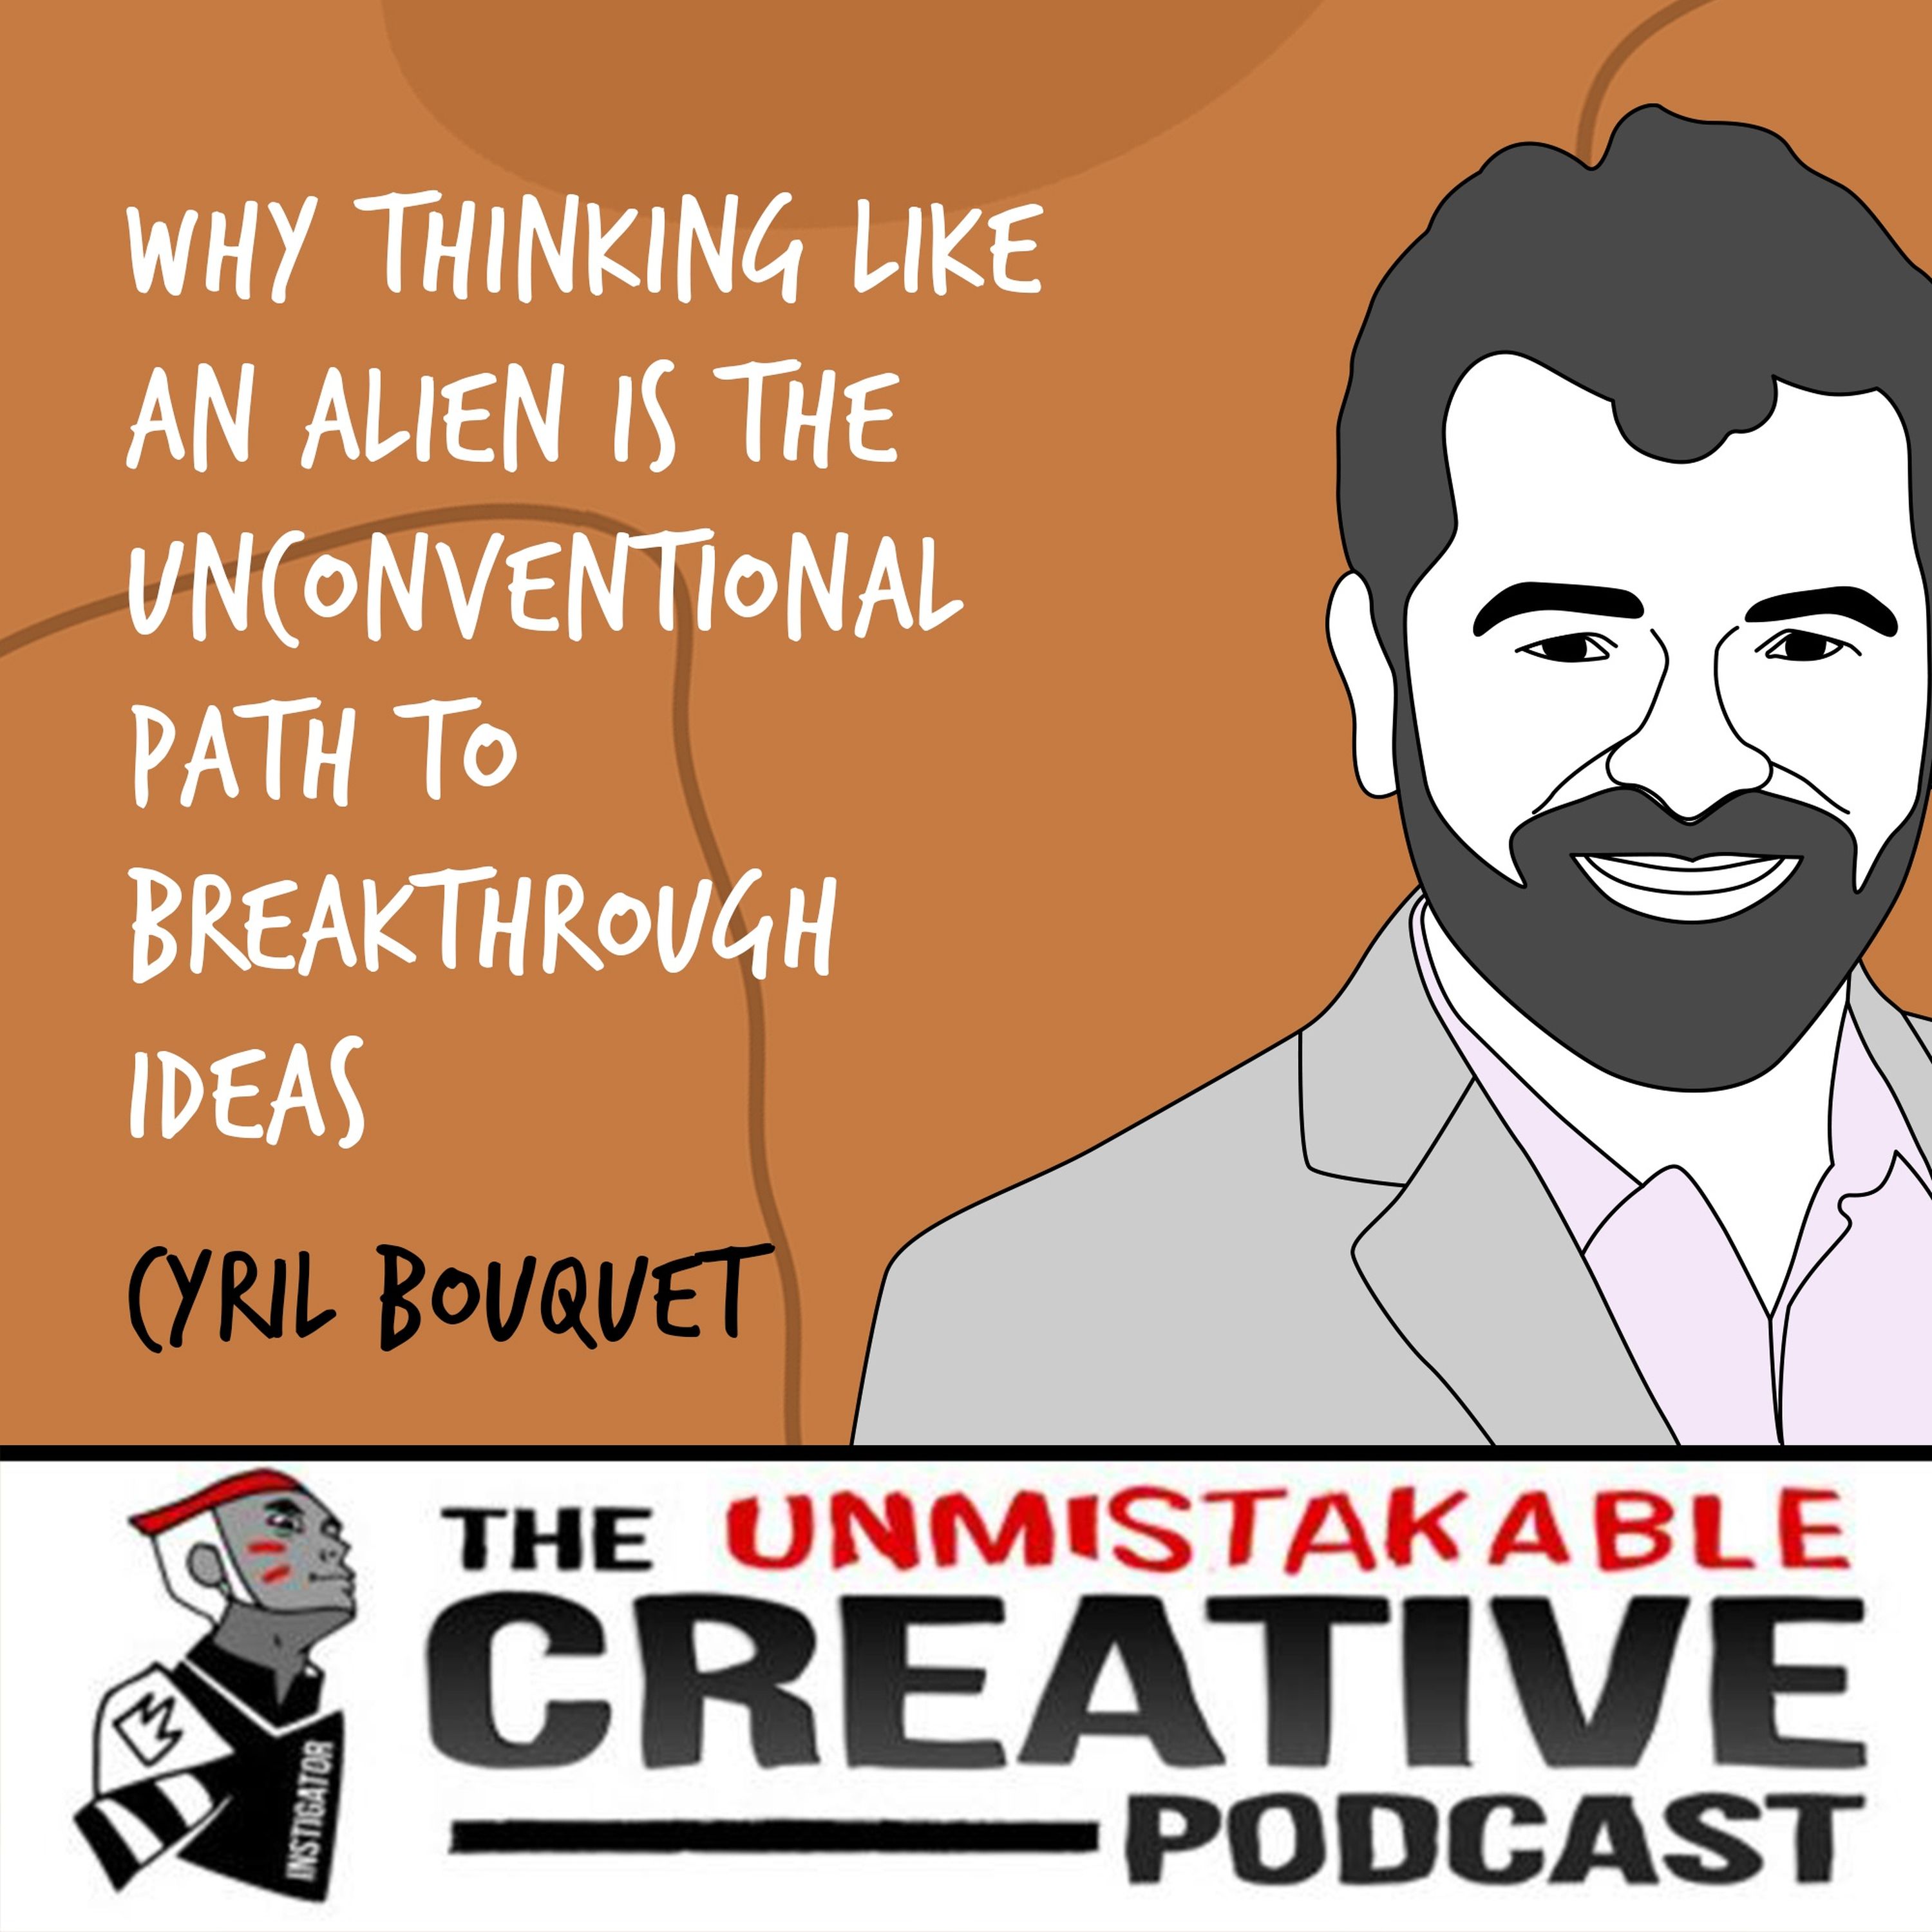 Cyril Bouquet | Why Thinking Like An Alien is the Unconventional Path to Breakthrough Ideas